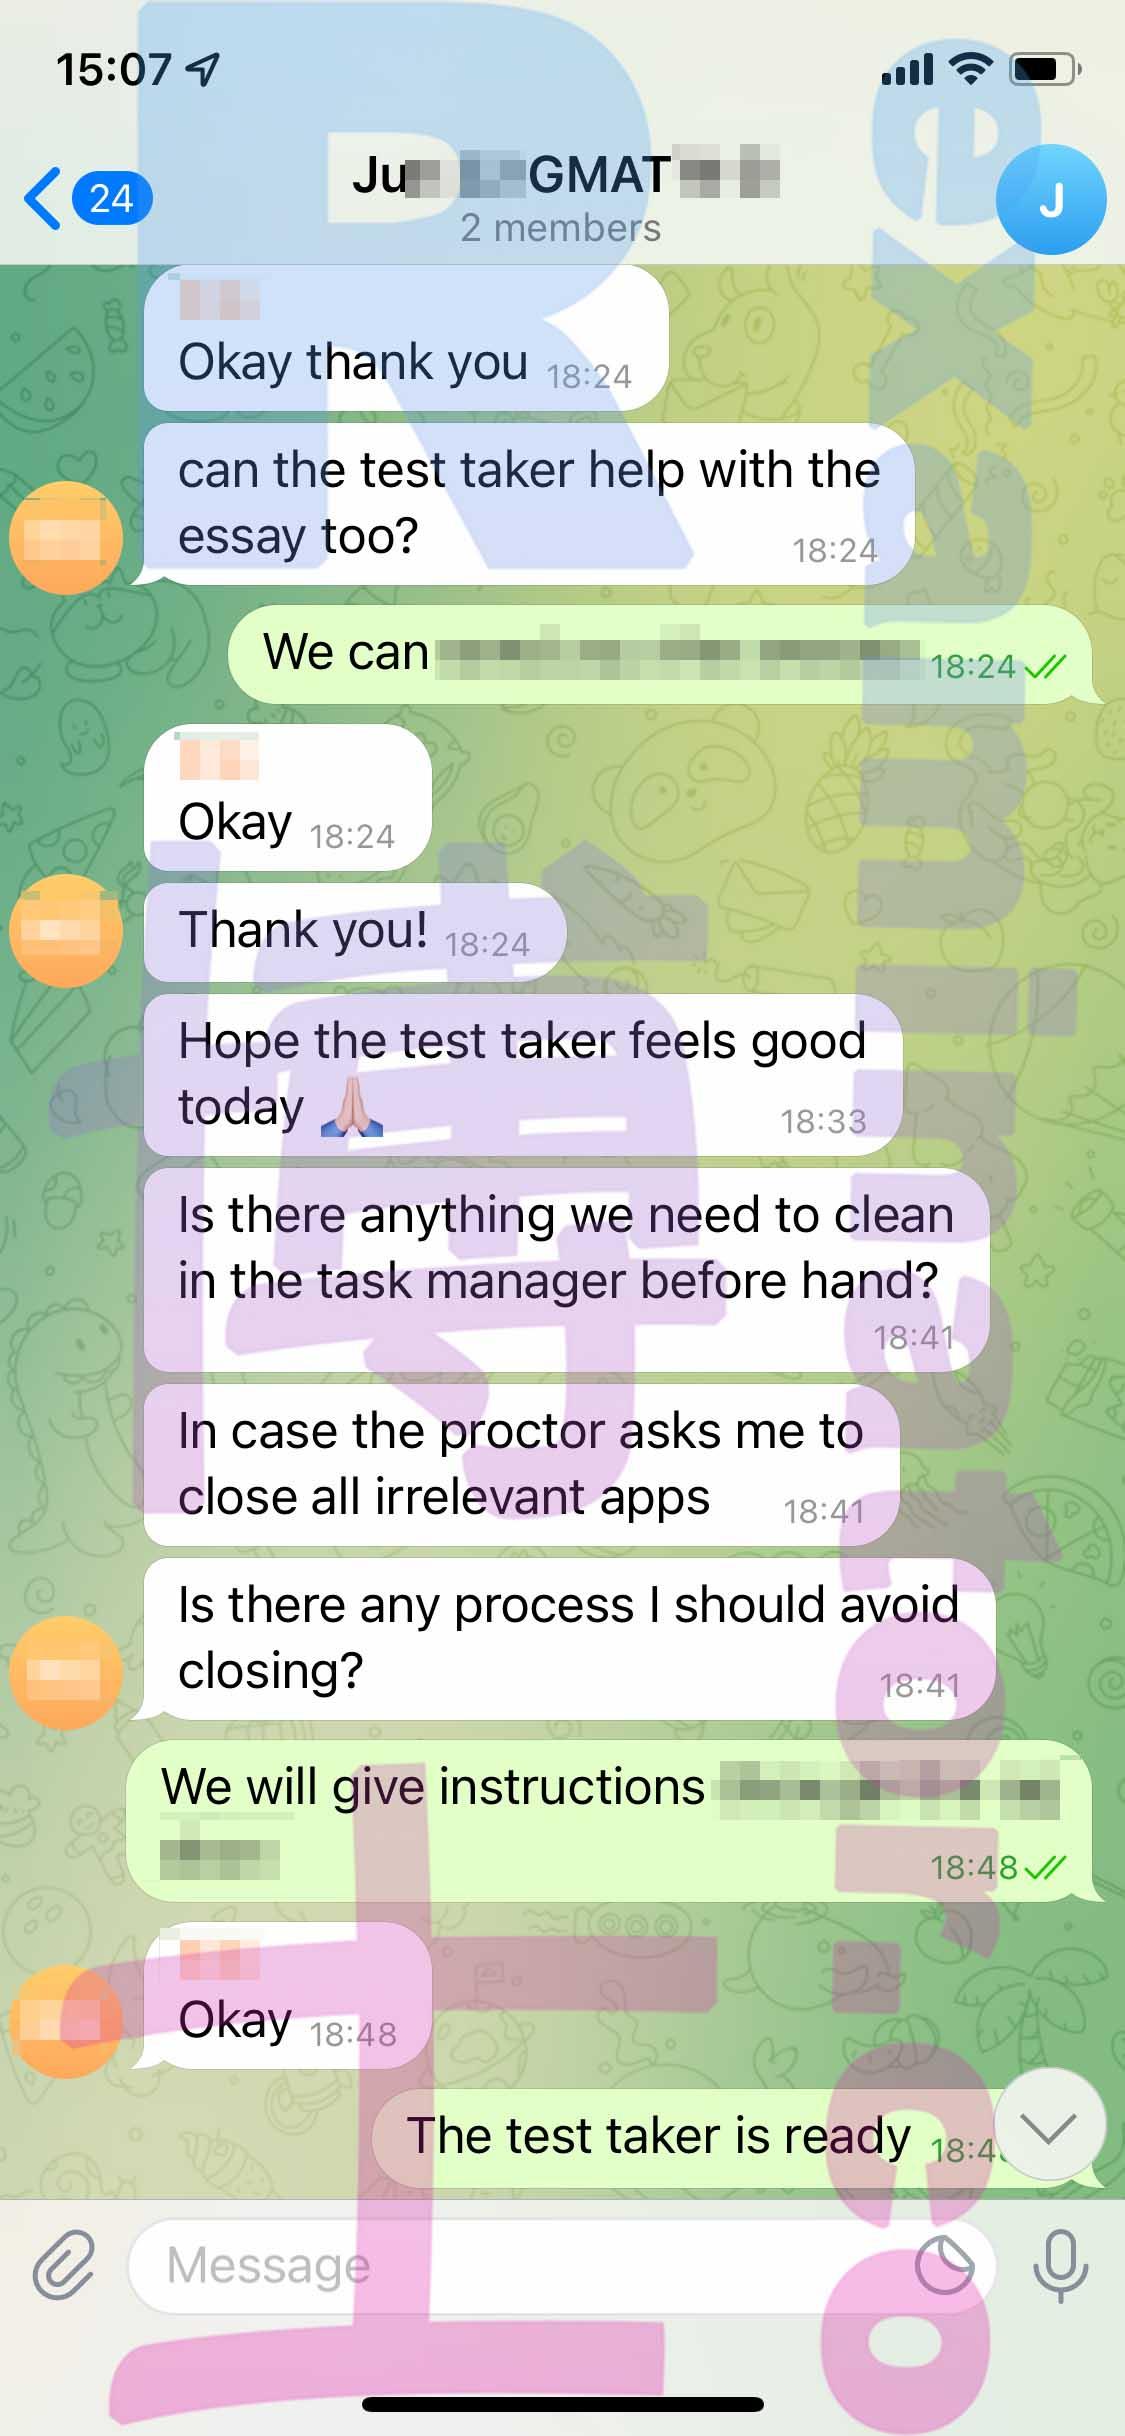 screenshot of chat logs for GMAT Proxy Testing success story #347